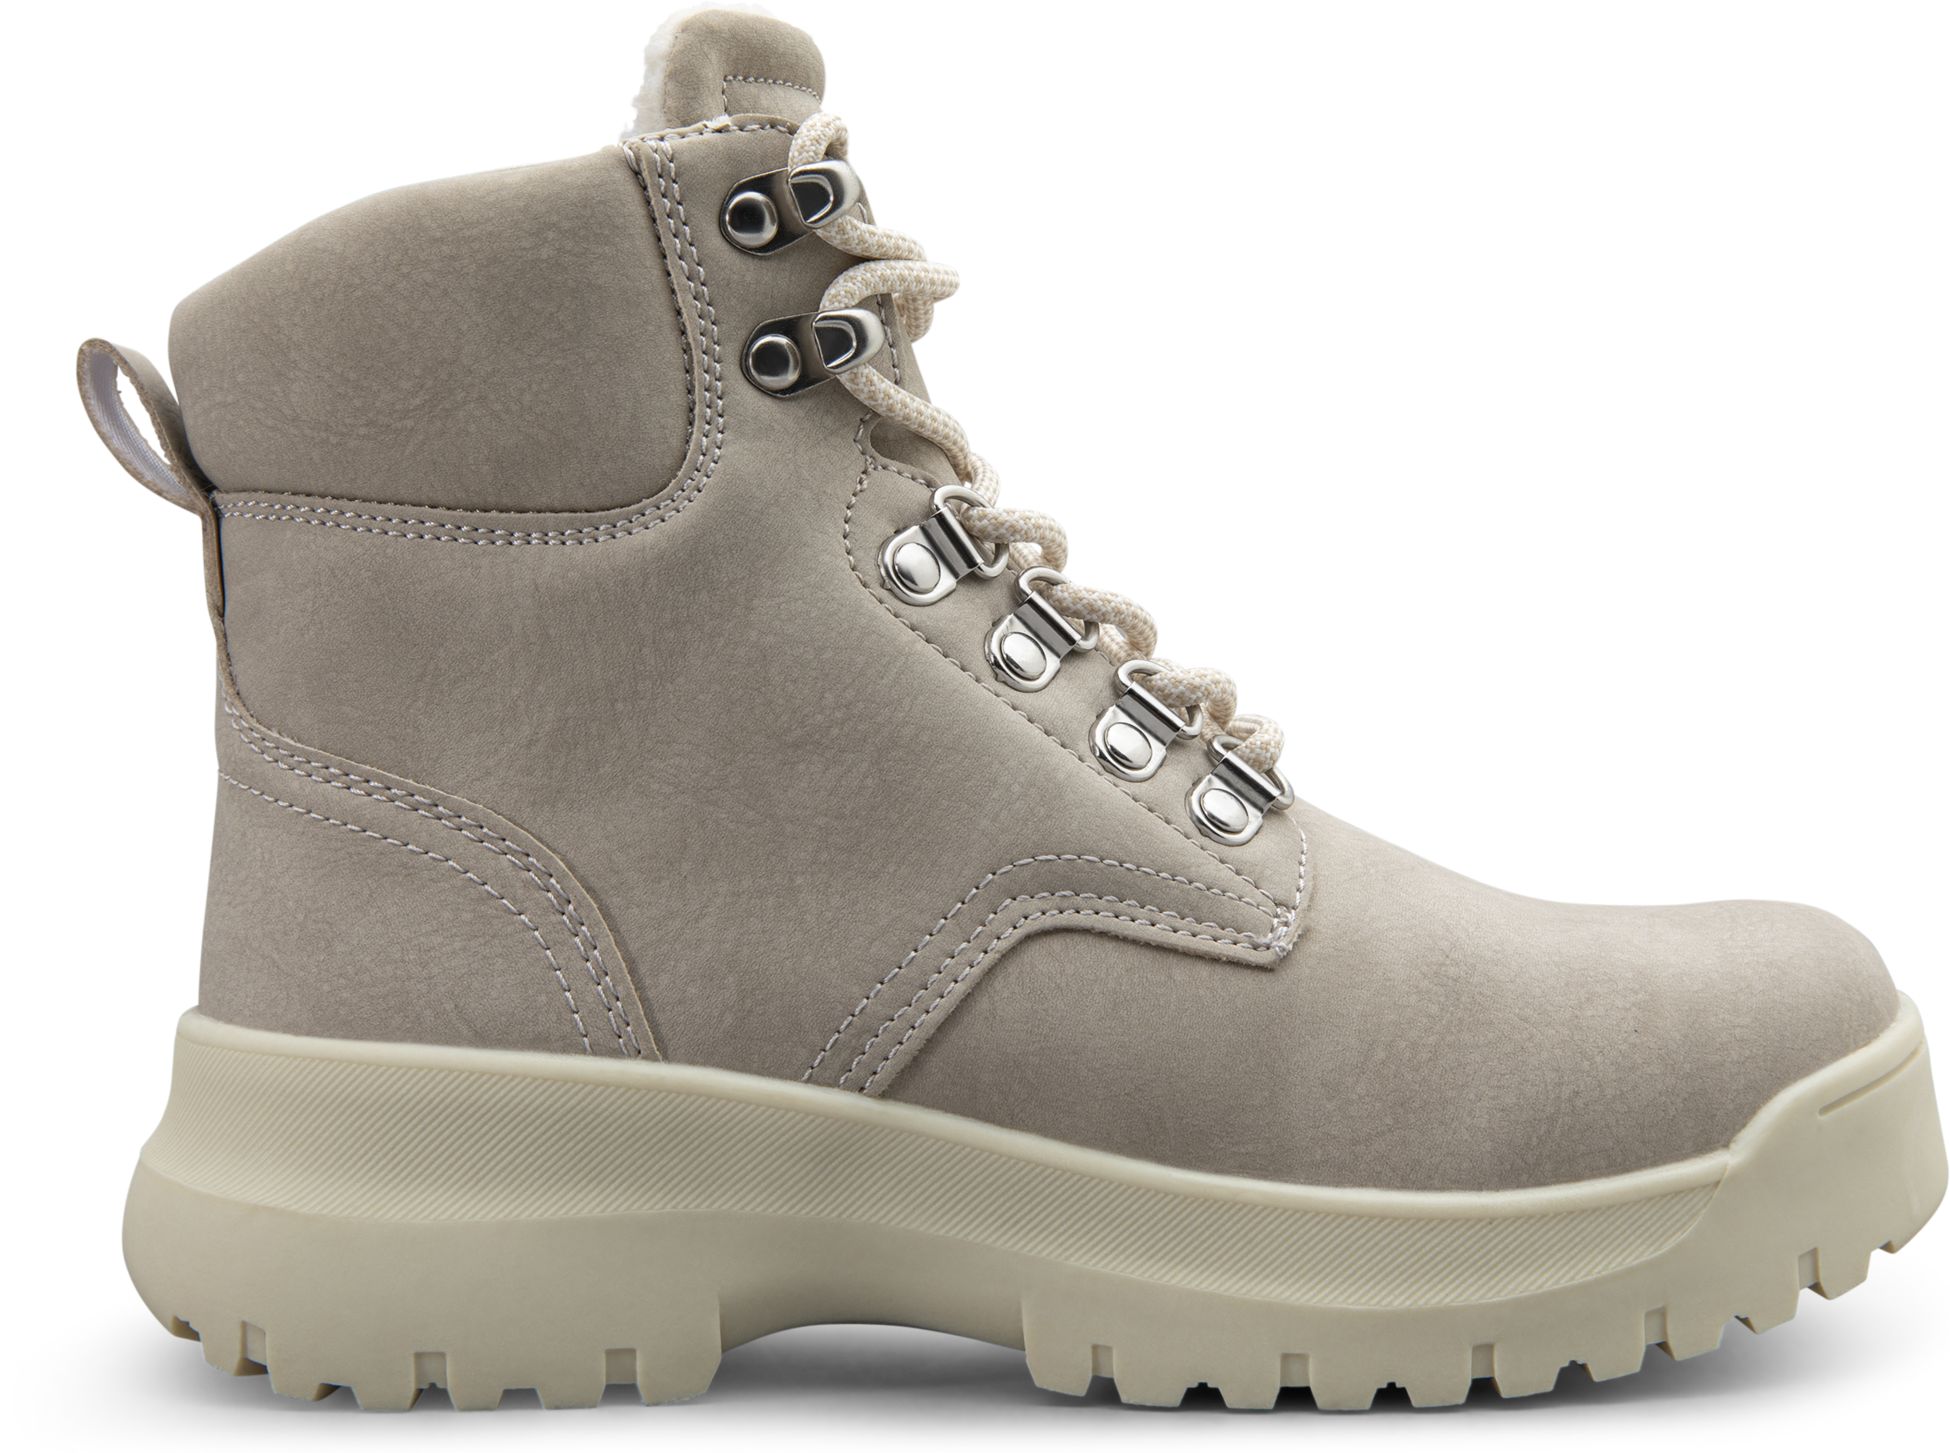 EVEREST, J LACE BOOT